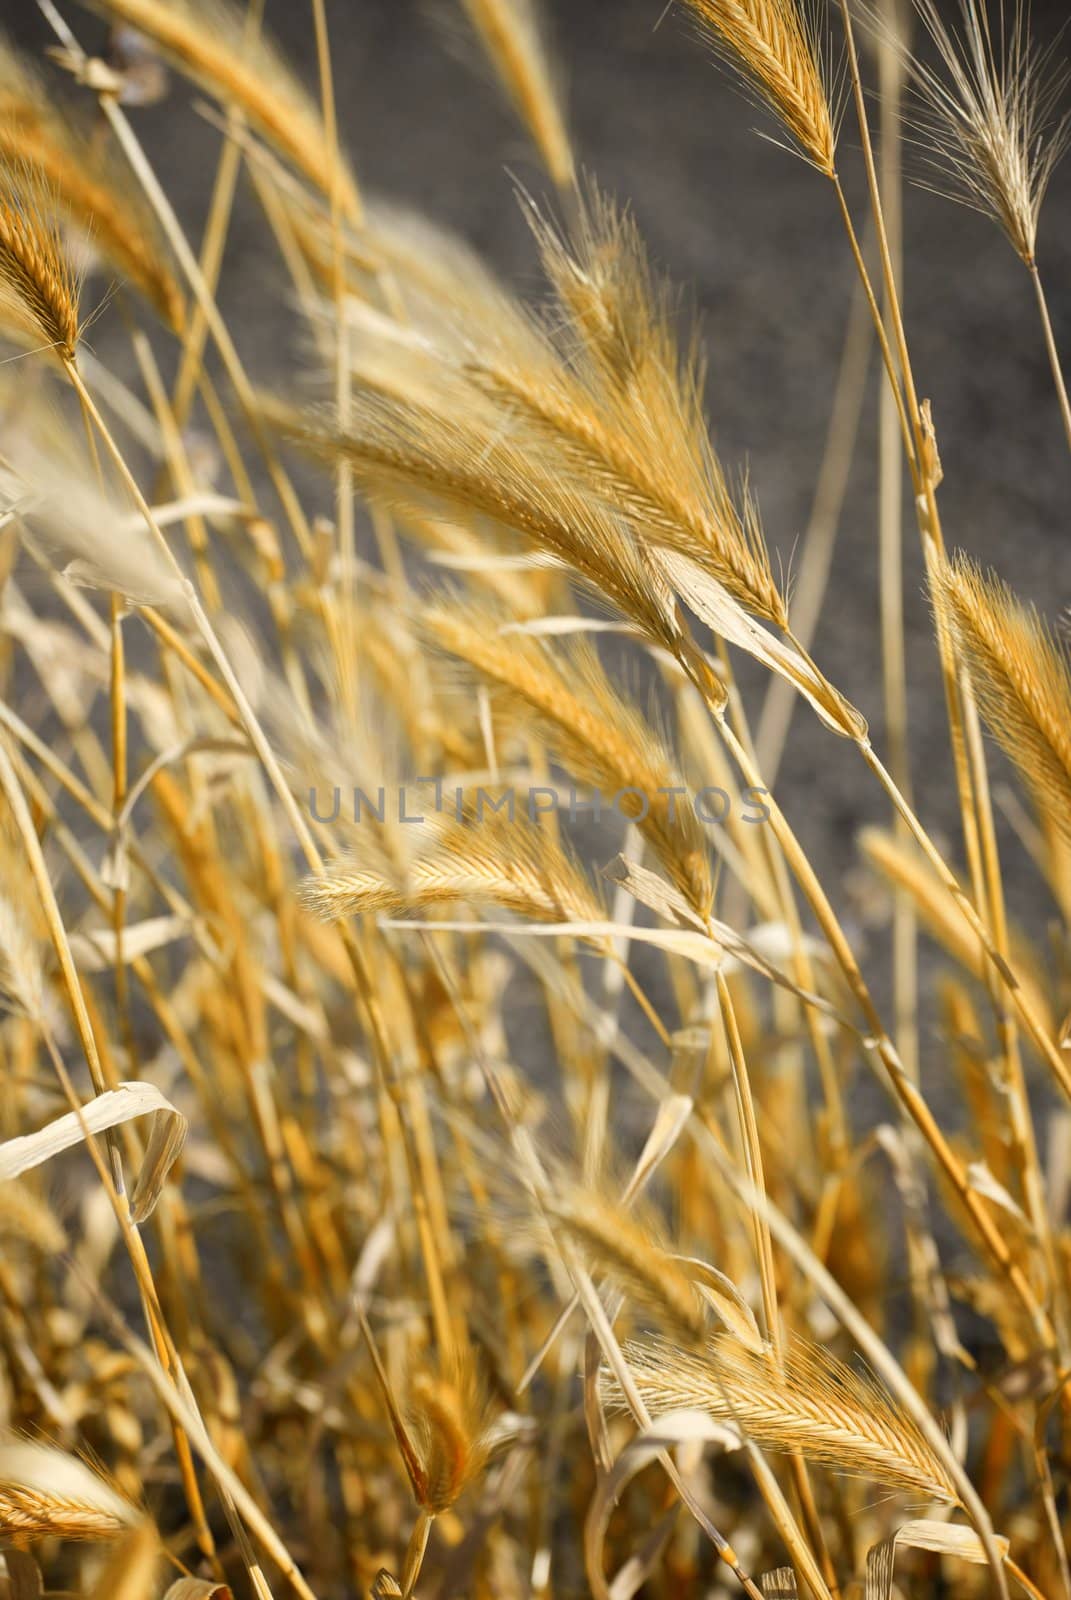 Stalks of Golden Wheat by pixelsnap